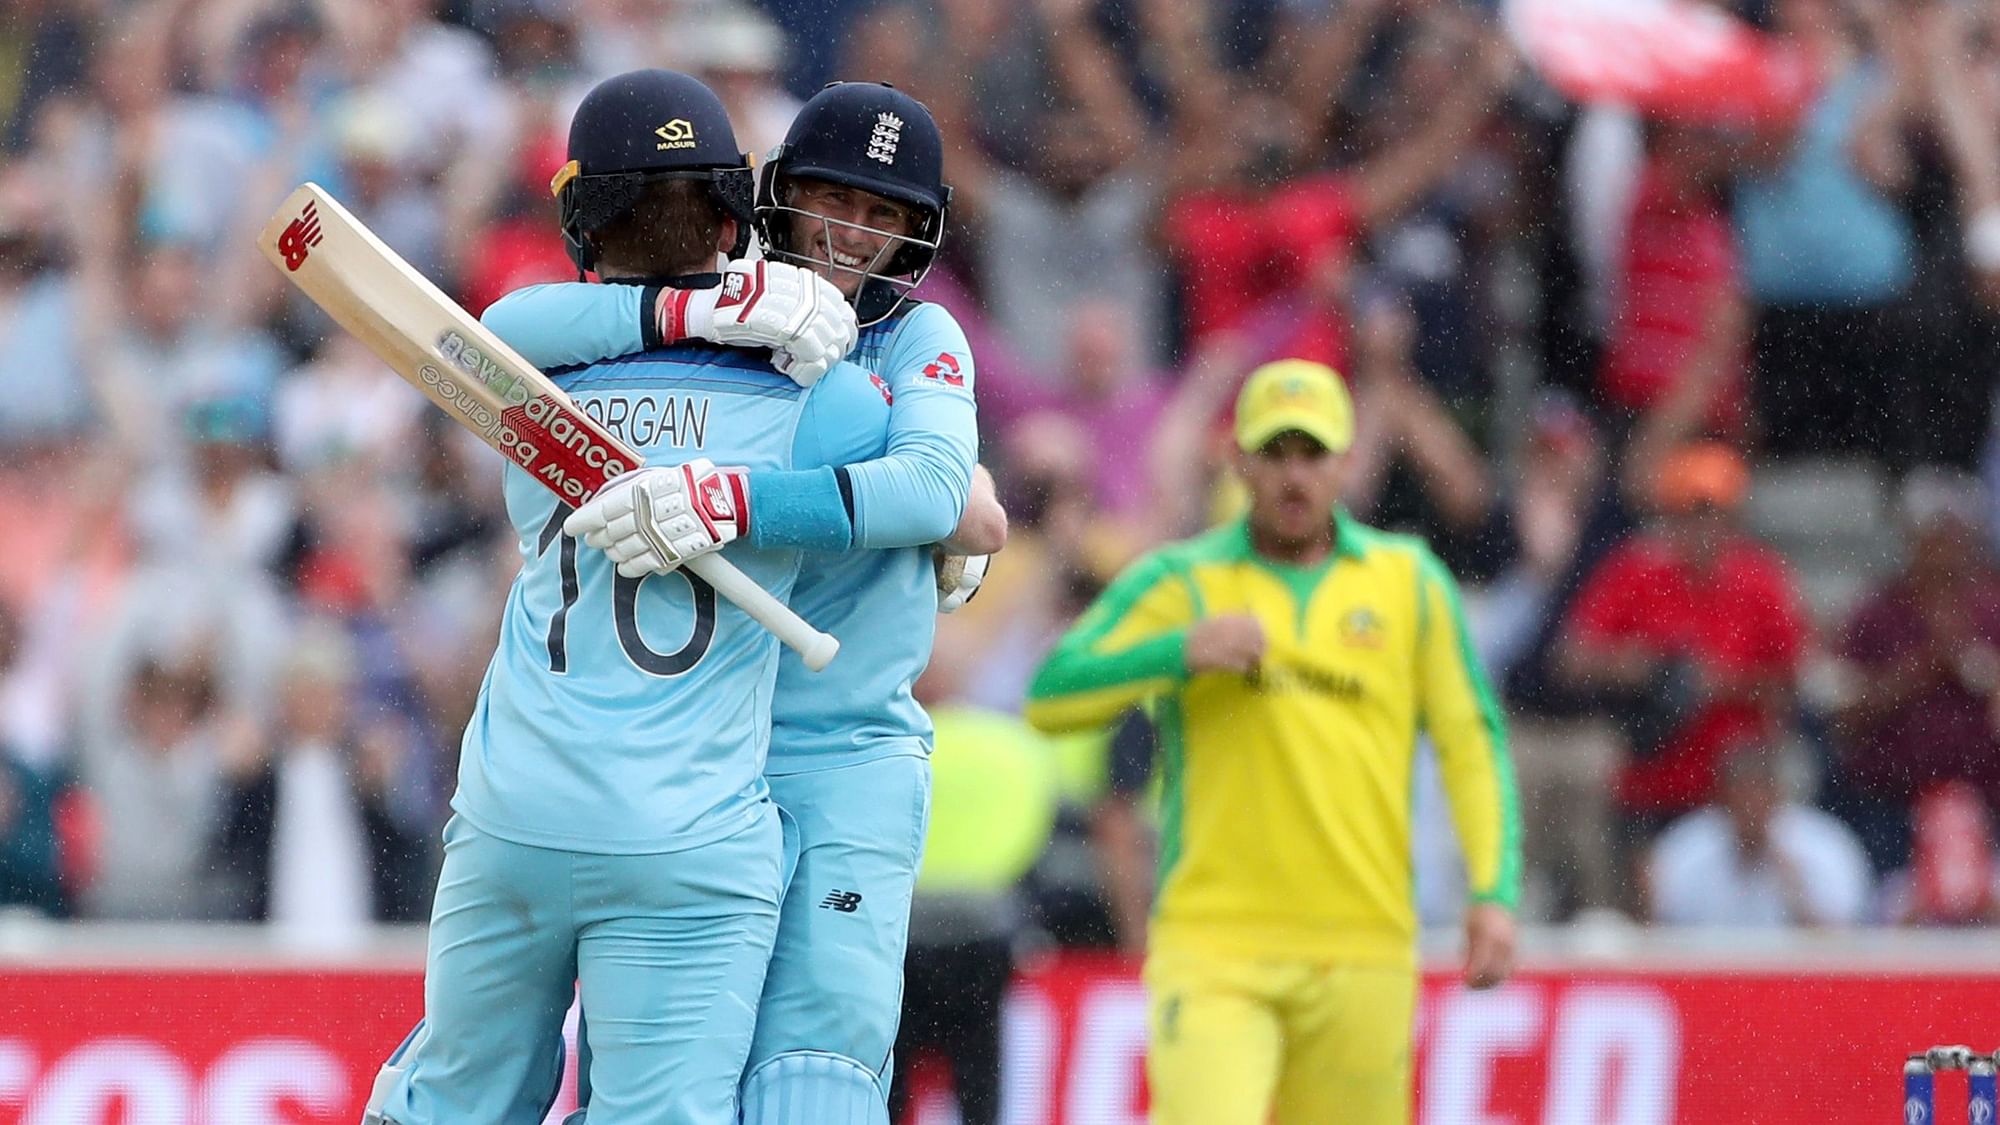 England will play New Zealand in the final at Lord’s on Sunday, 14 July.